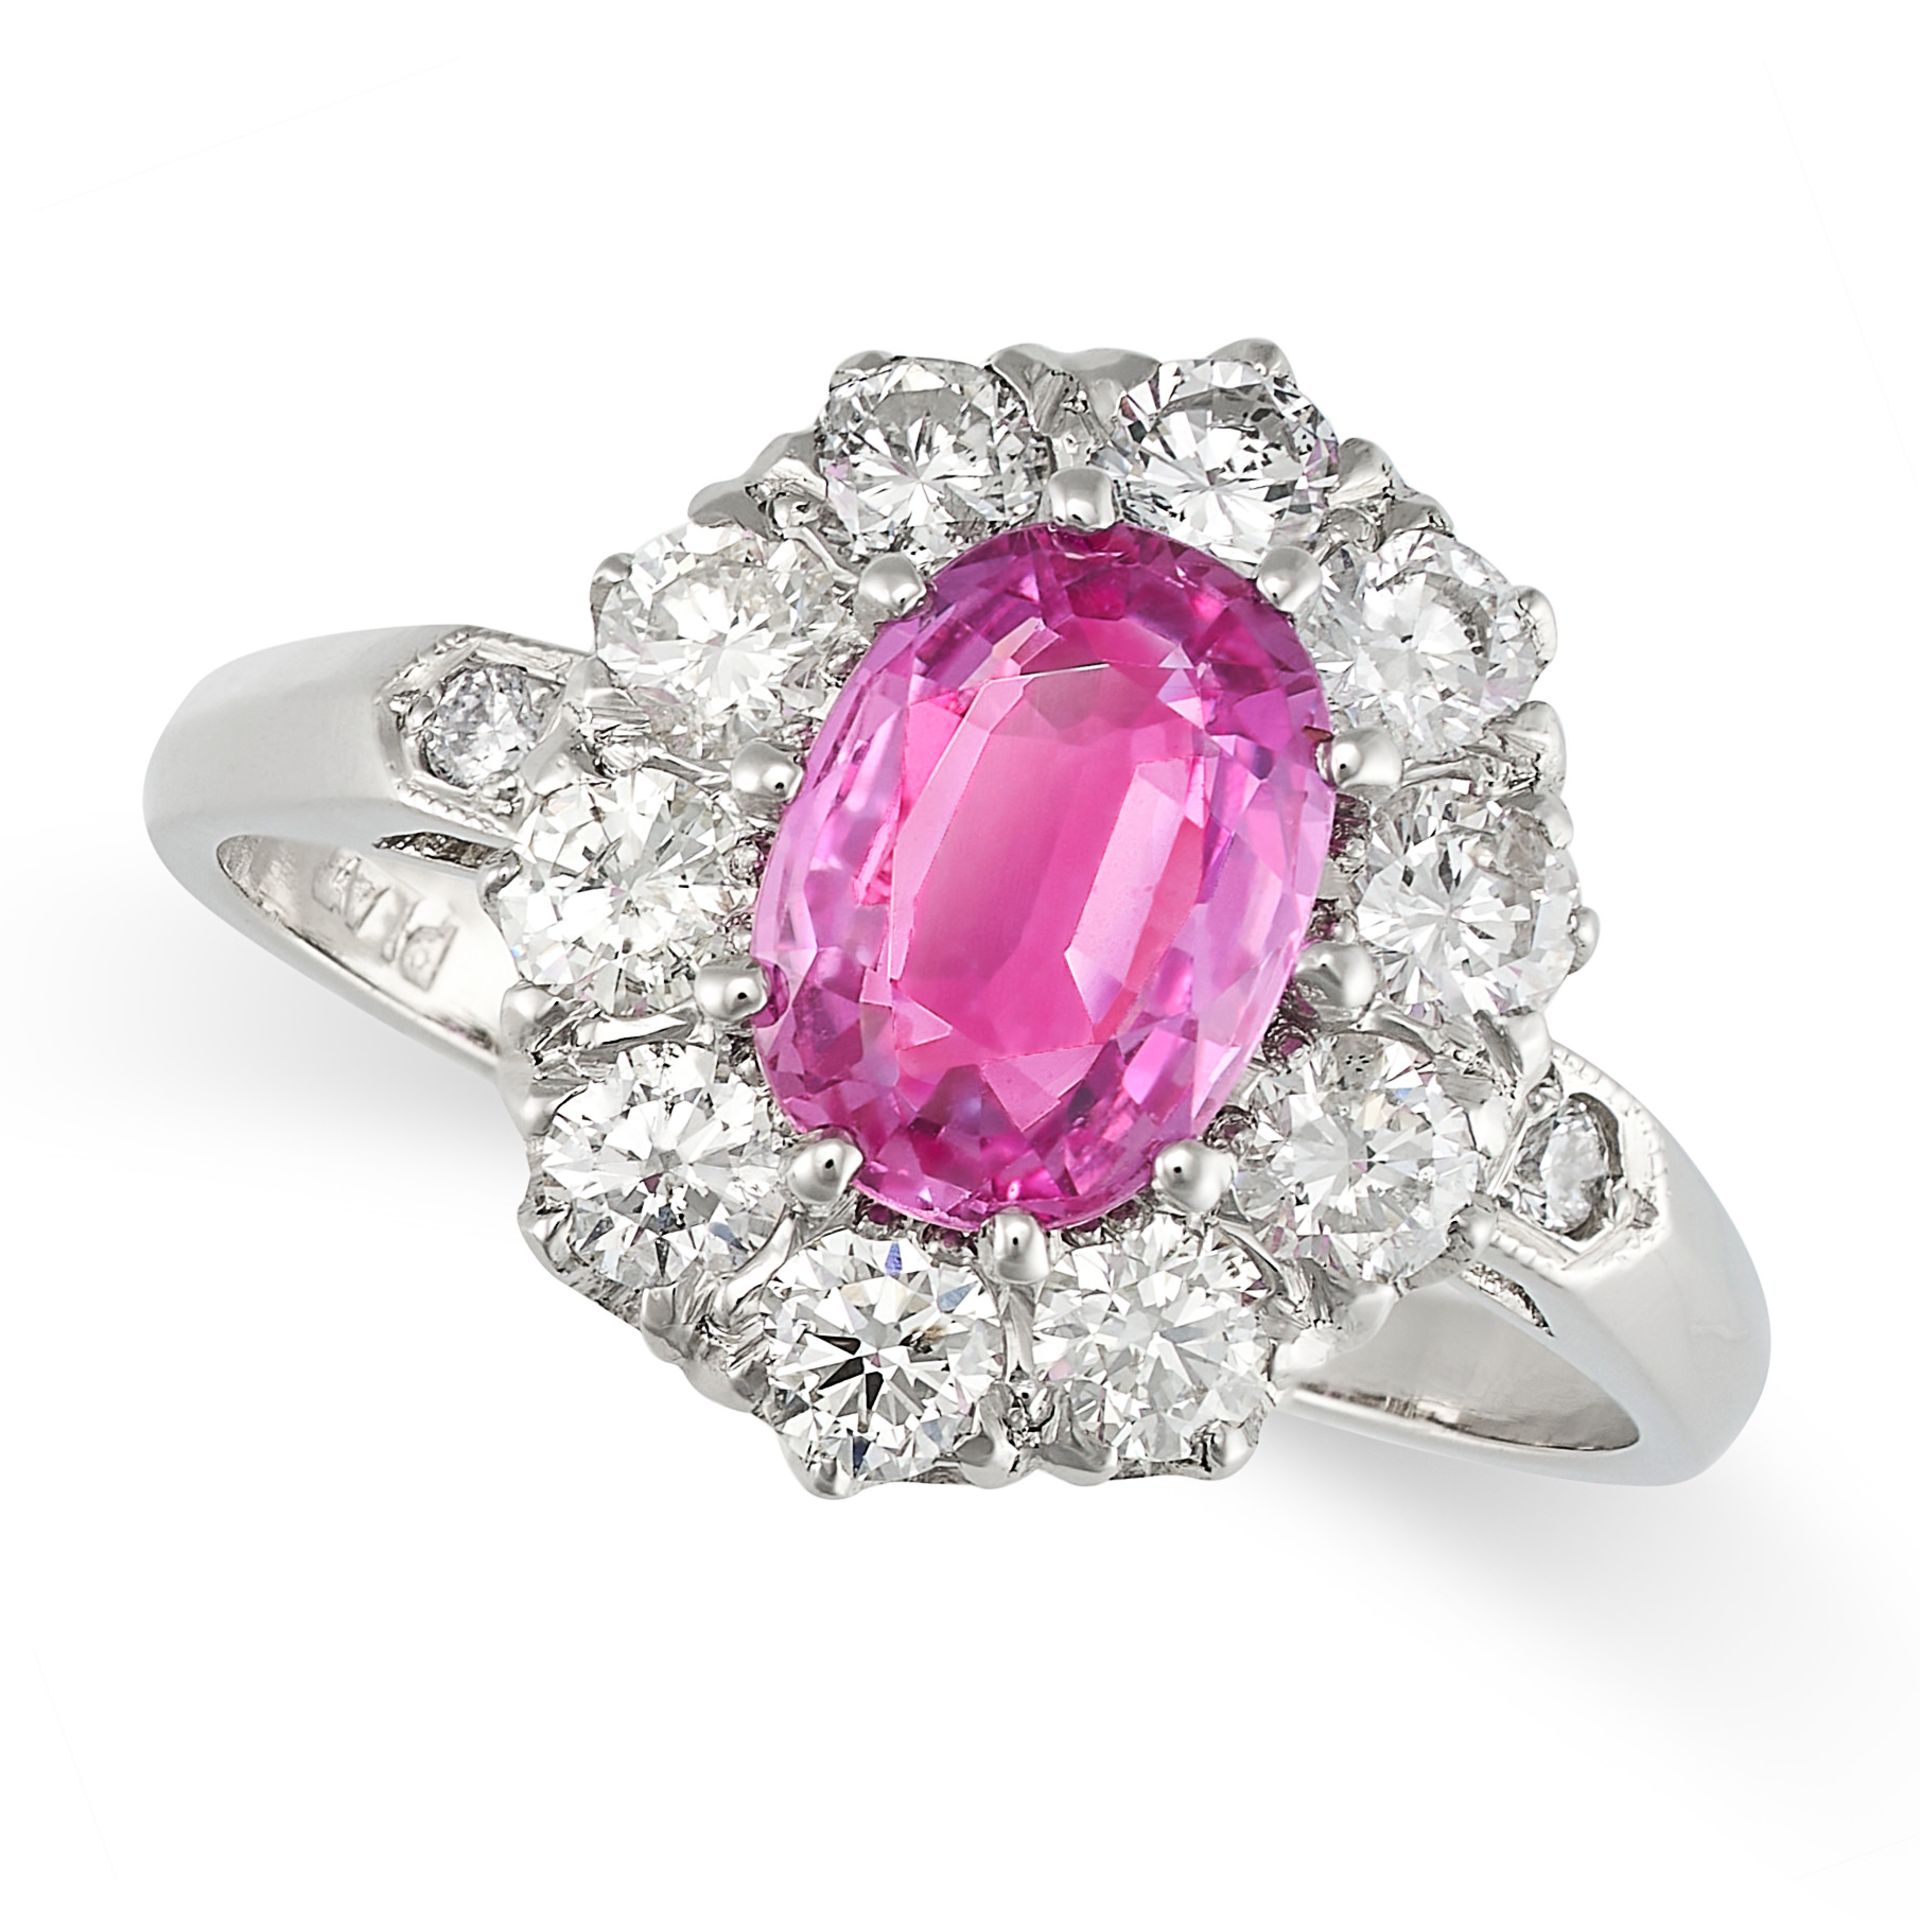 A PINK SAPPHIRE AND DIAMOND CLUSTER RING in platinum, set with an oval cut pink sapphire of appro...